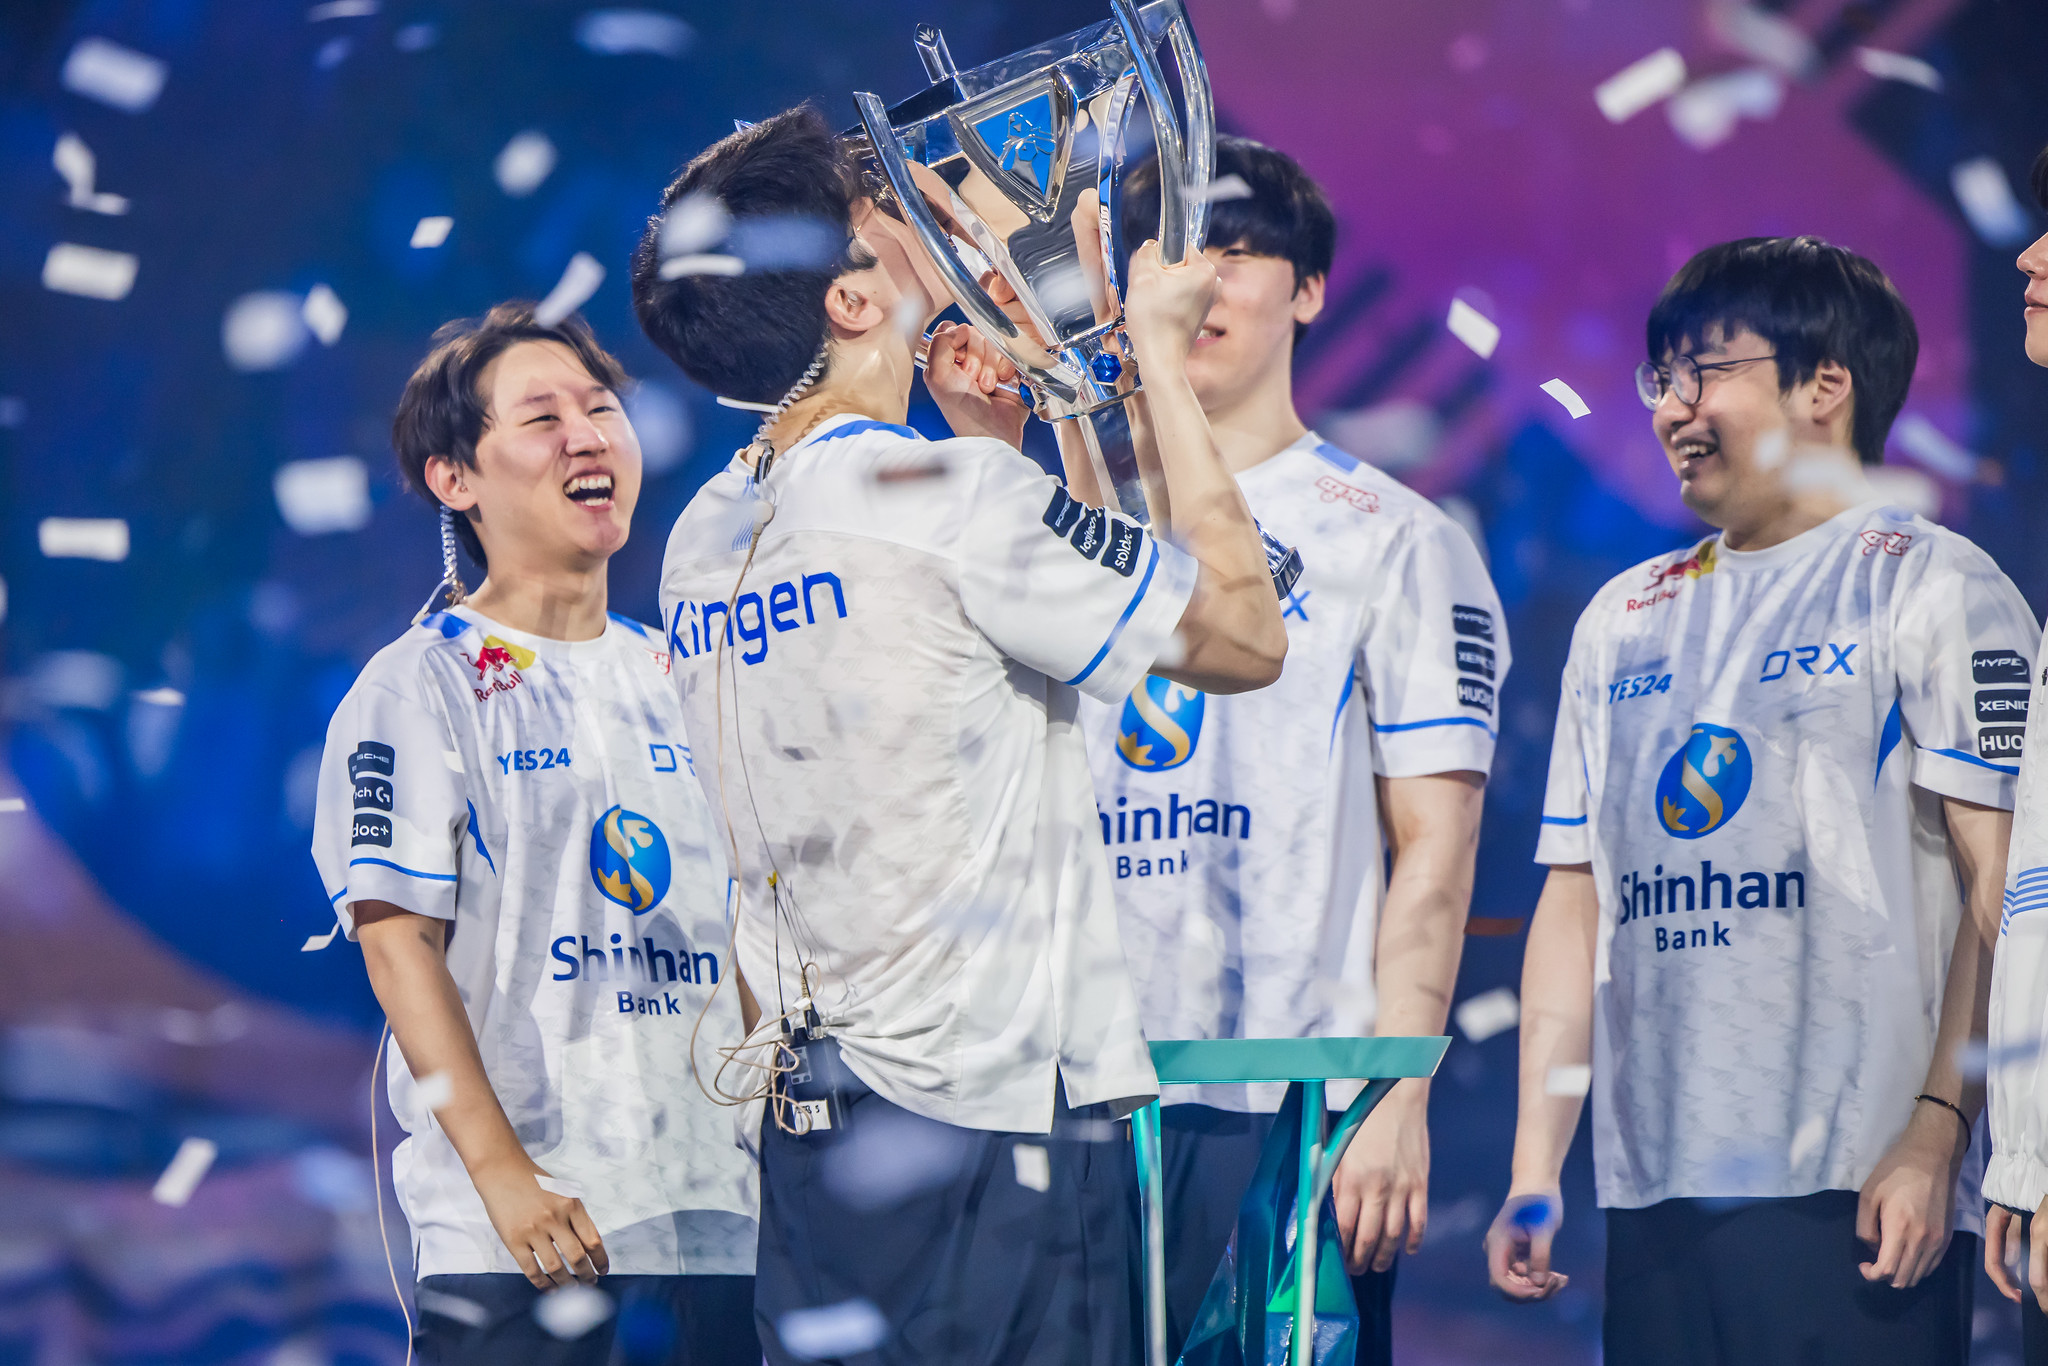 League of Legends: DRX are your 2022 Worlds Champions